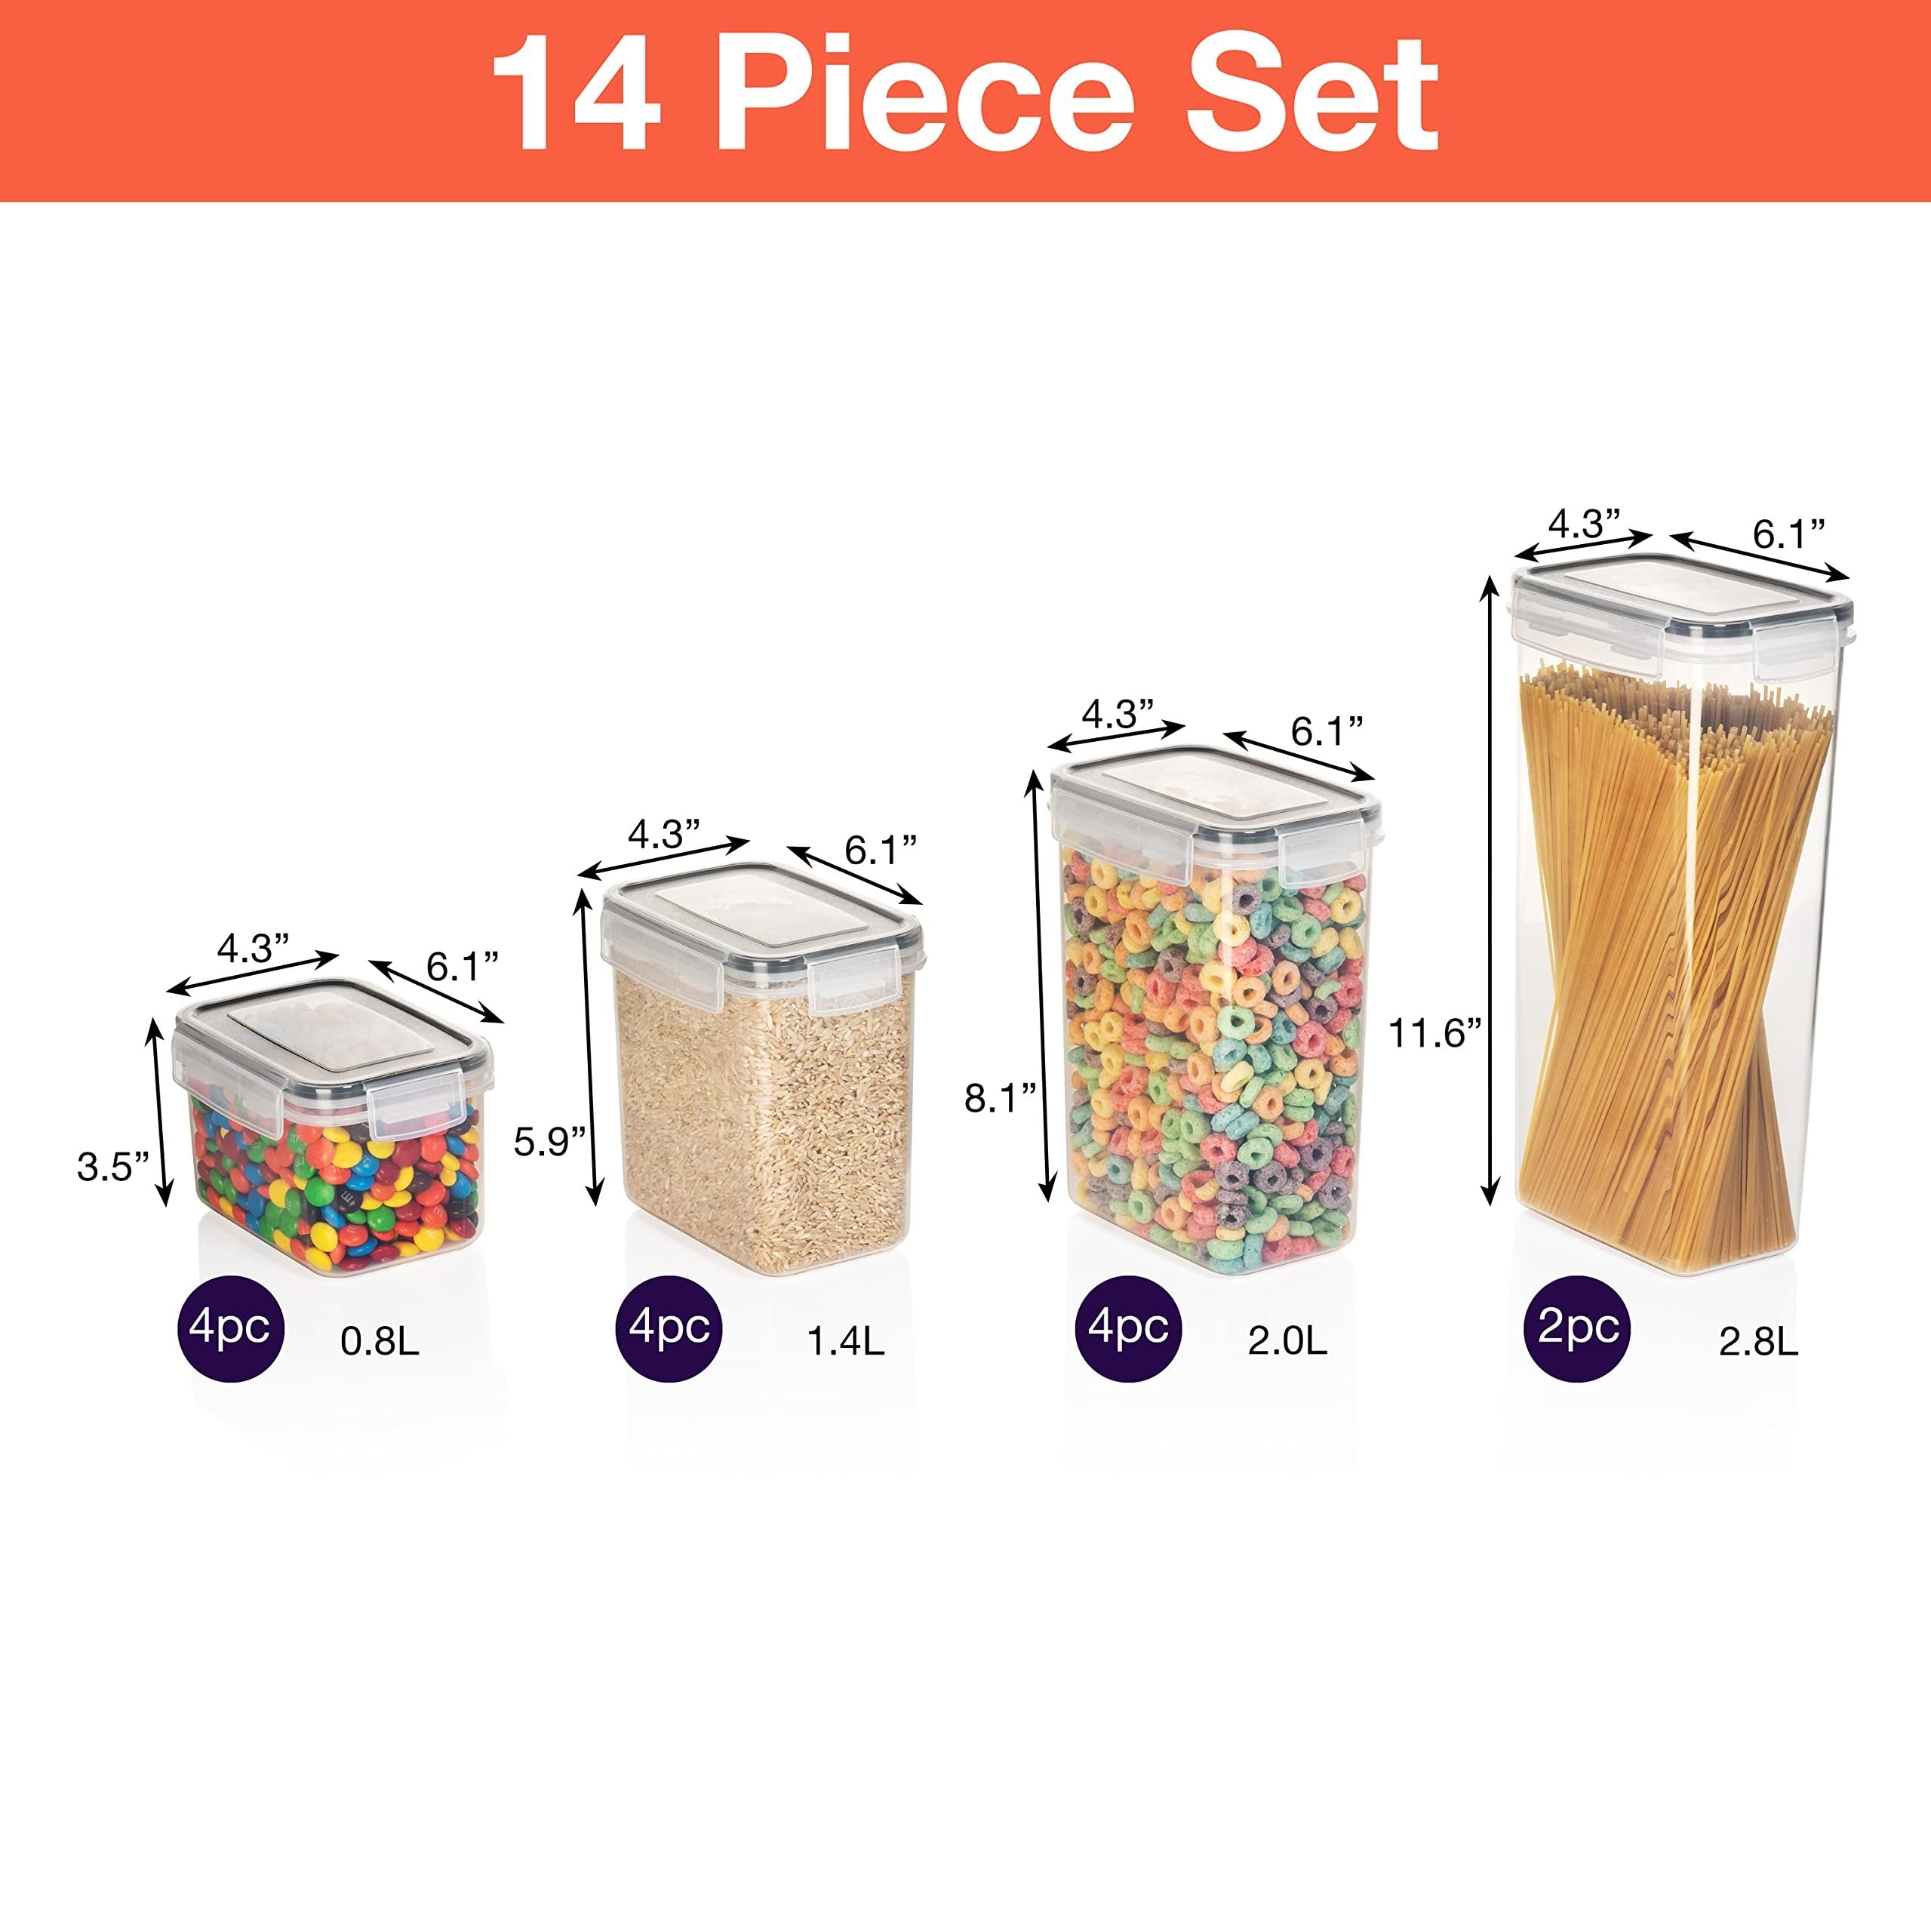 ClearSpace Airtight Food Storage Containers -14 Pack BPA Free Kitchen Organization Set for Pantry Organization and Storage with Durable Lids Ideal for Cereal, Flour & Sugar (Black)